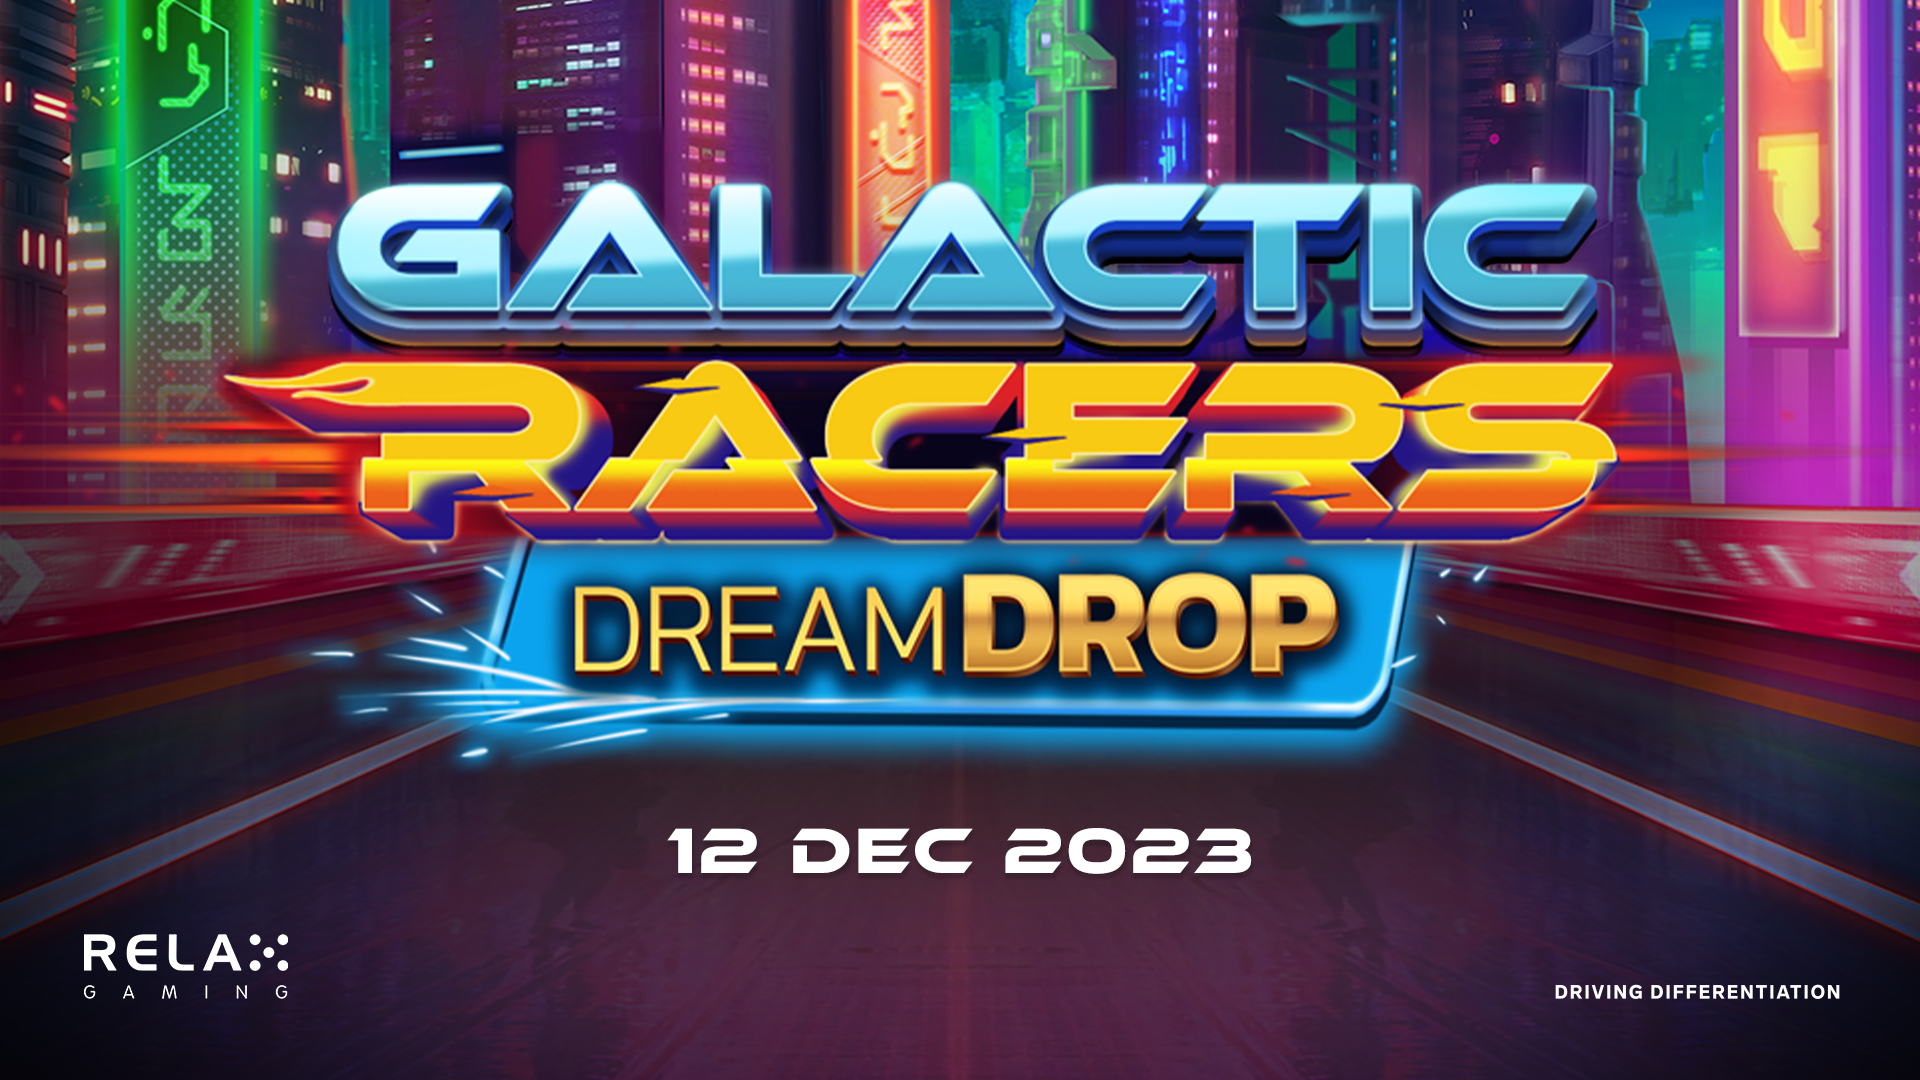 Gear up for lawless racing as Relax Gaming releases Galactic Racers Dream Drop